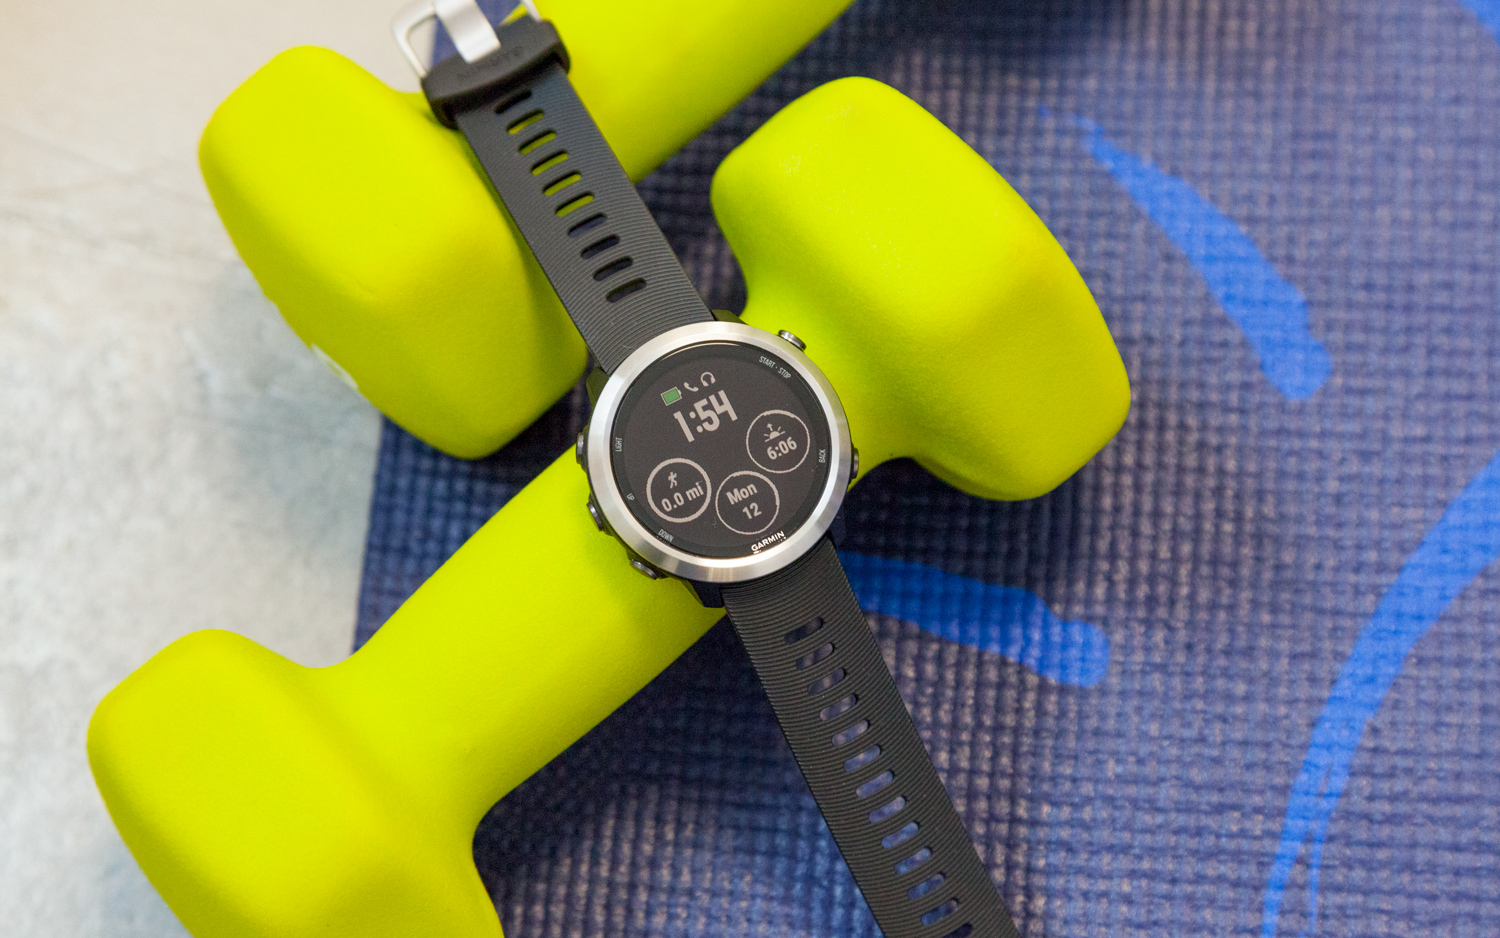 Garmin Review: Paying a Premium for Music | Tom's